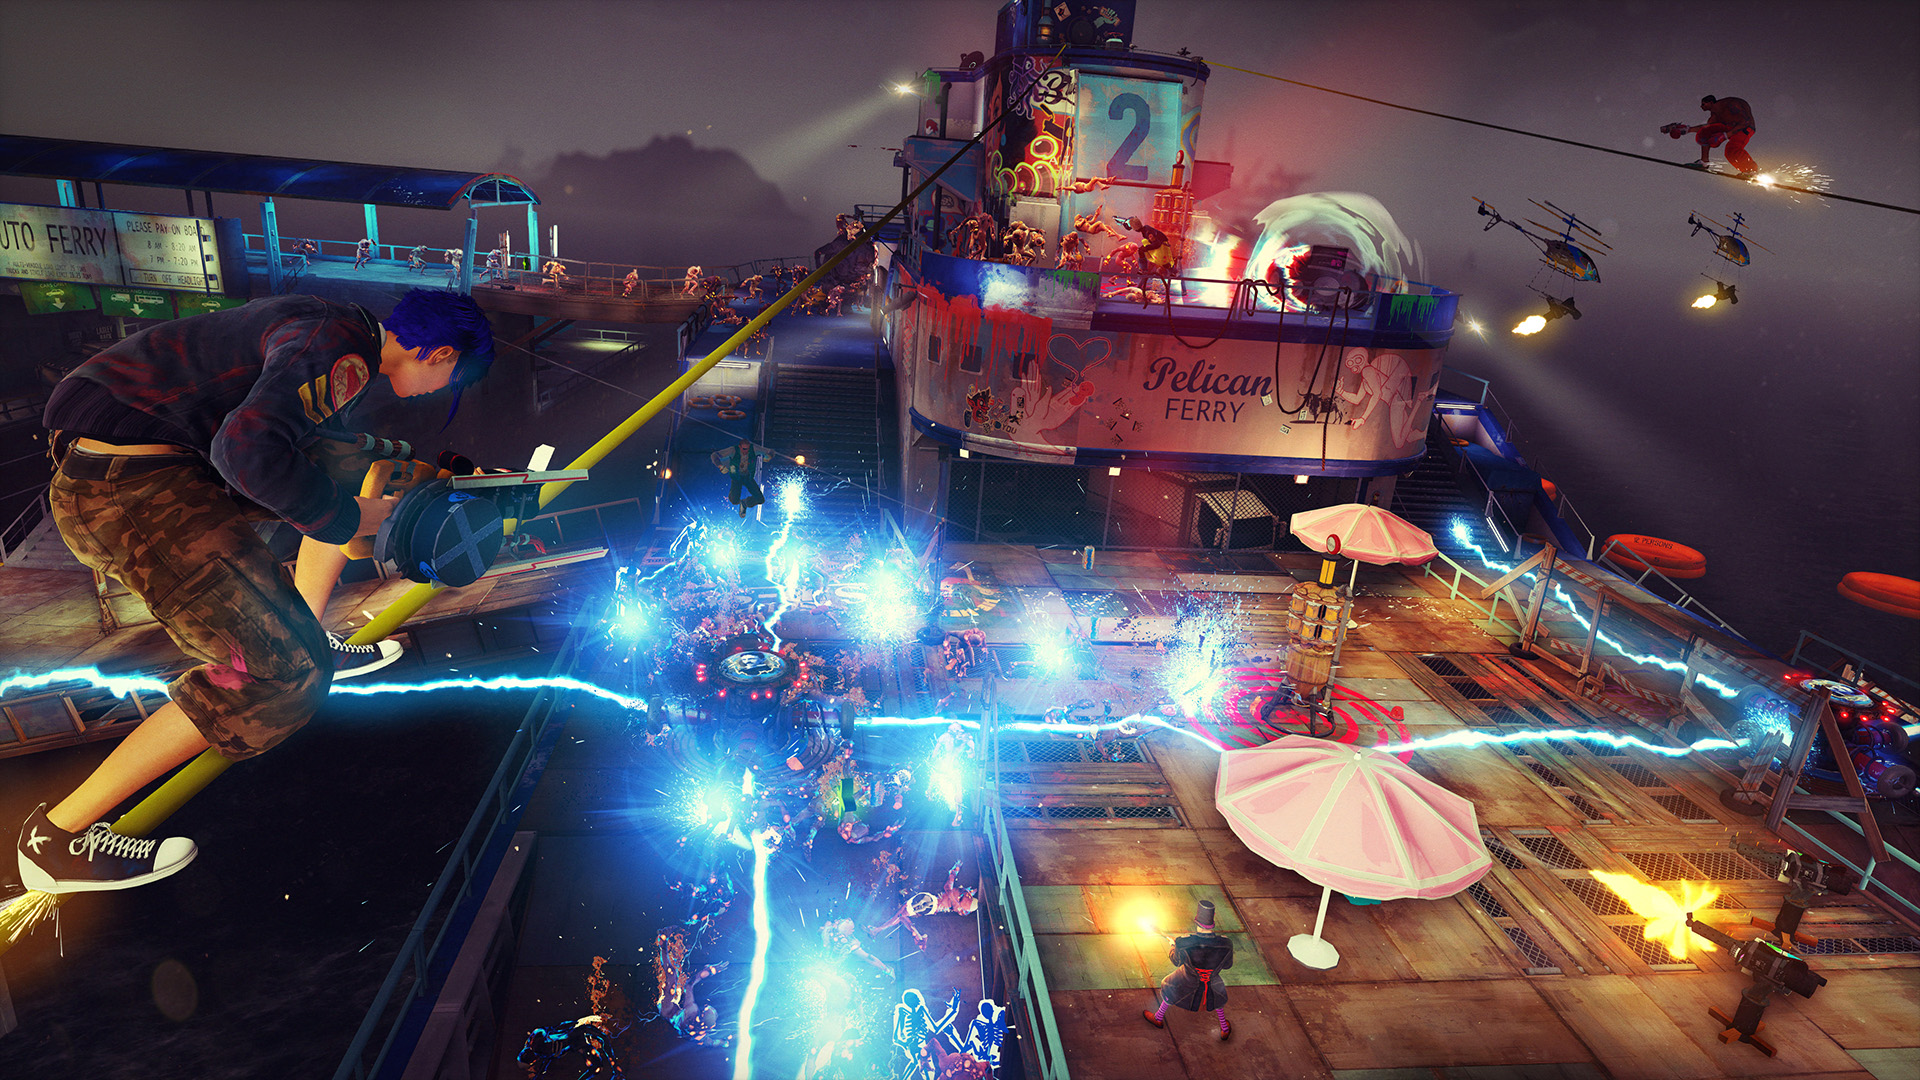 Insomniac games releases new trailer for Sunset Overdrive DLC